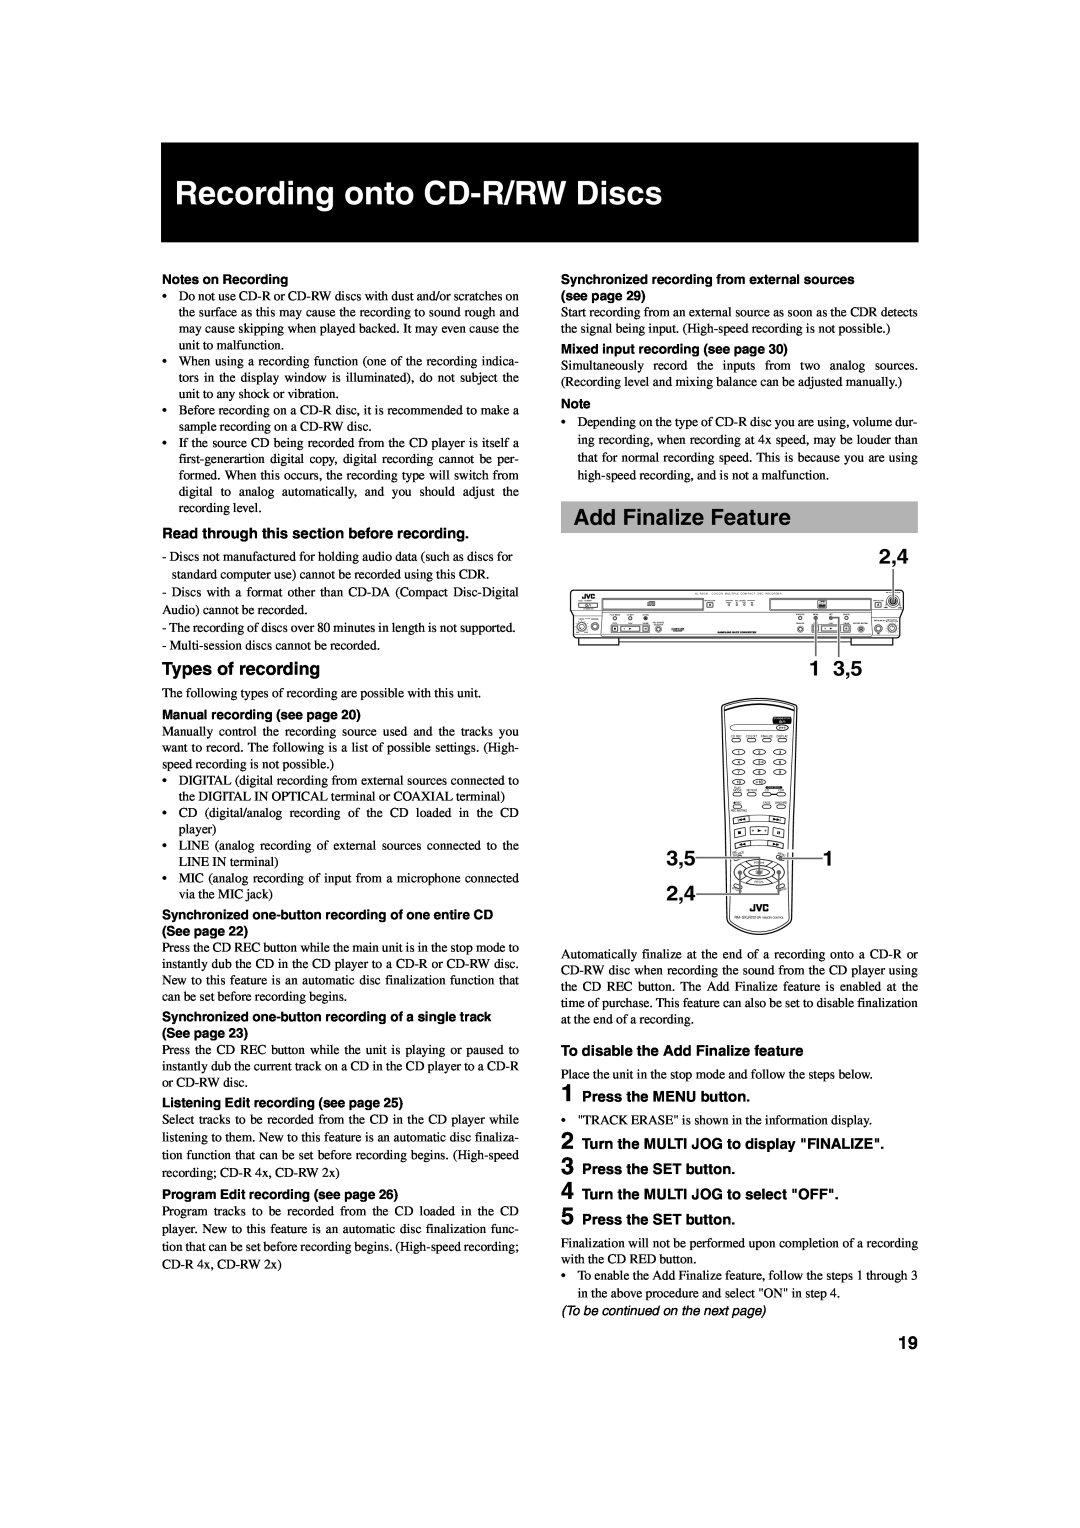 JVC XL-R2010BK manual Recording onto CD-R/RWDiscs, Add Finalize Feature, Types of recording, Notes on Recording 